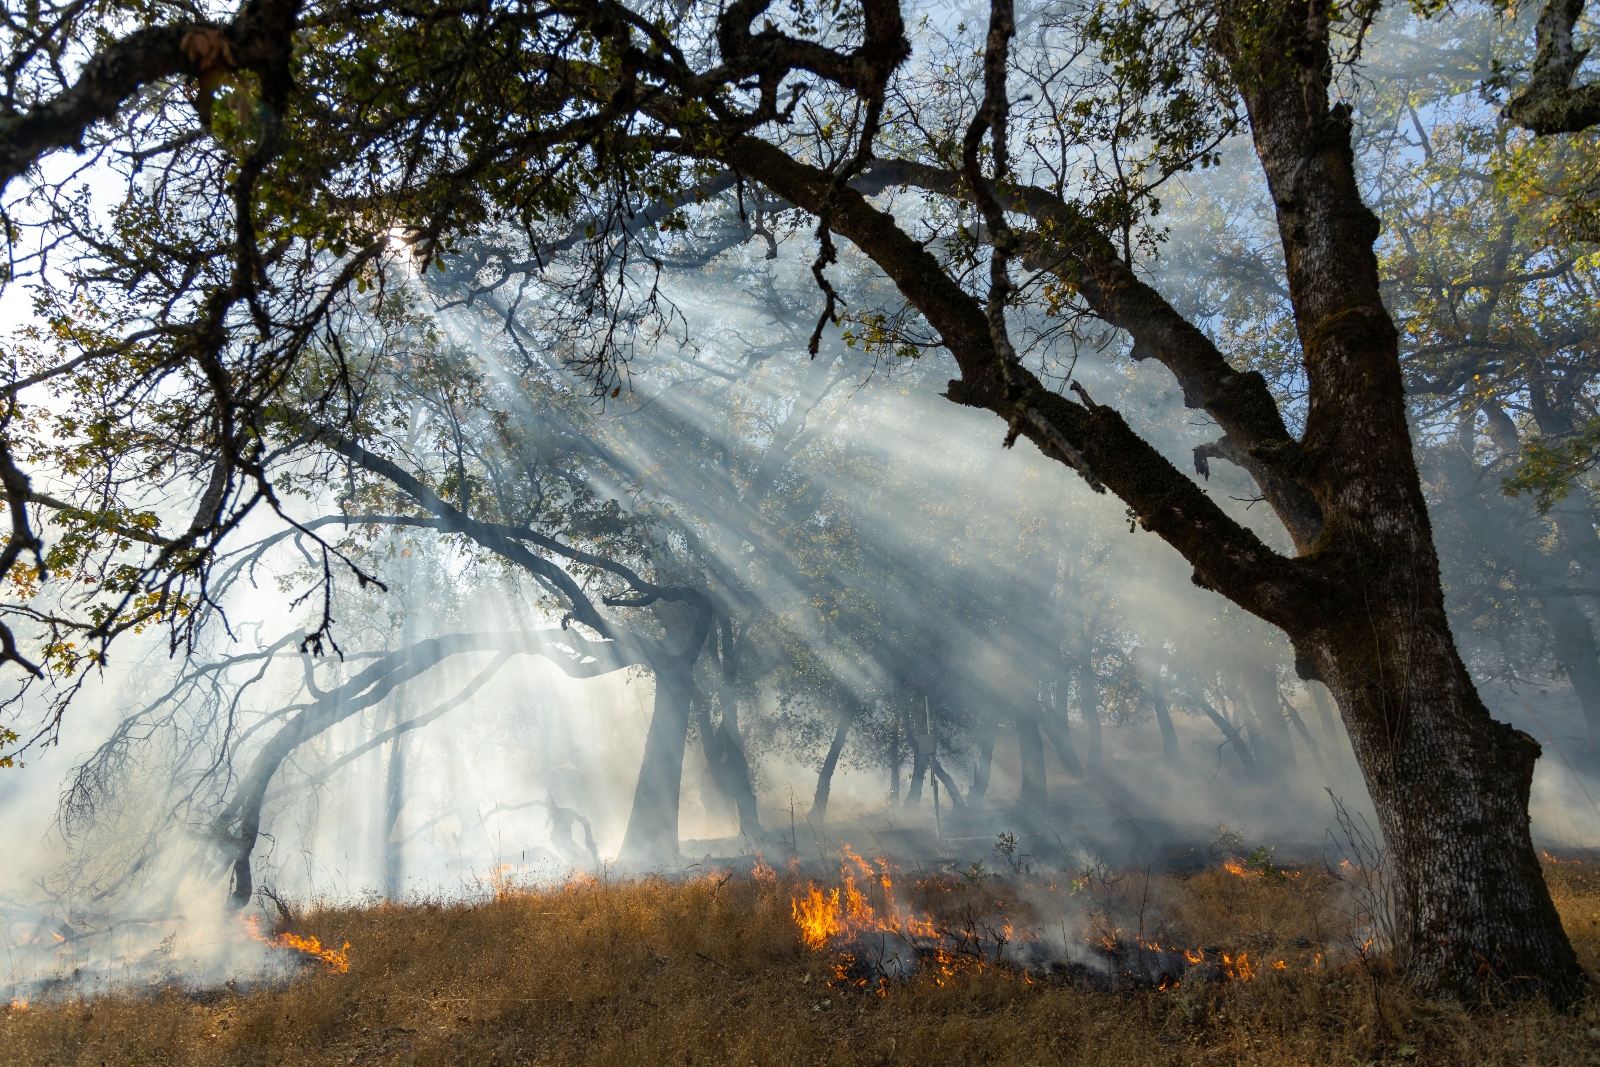 Sunlight peeking through the trees during a prescribed burn at Pepperwood Preserve